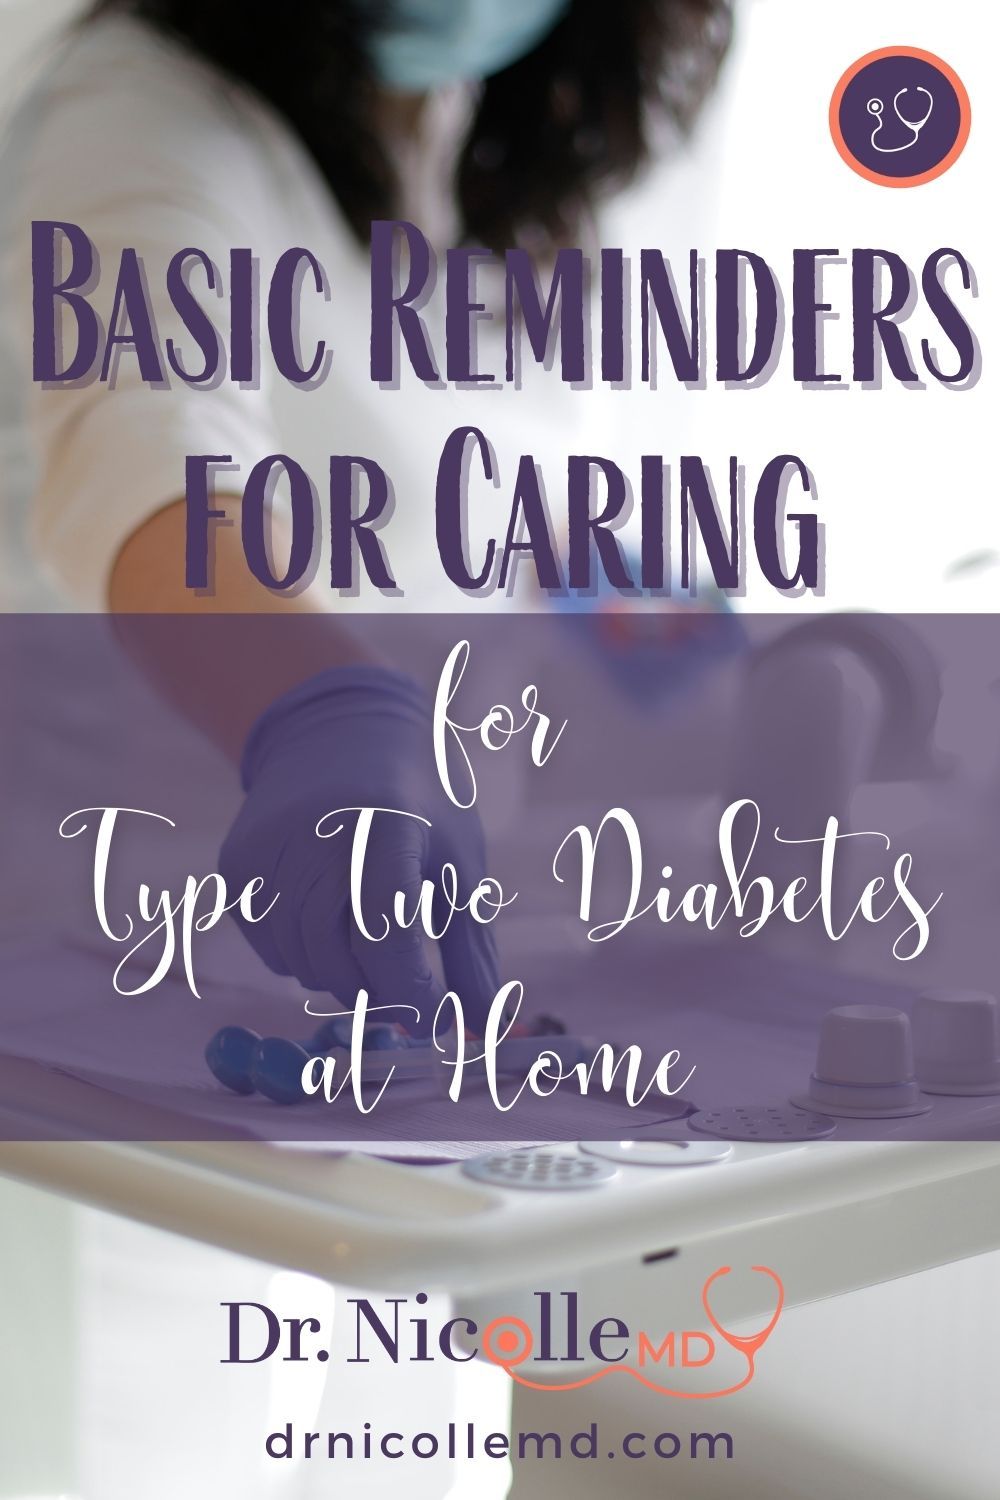 Basic Reminders for Caring for Type Two Diabetes at Home